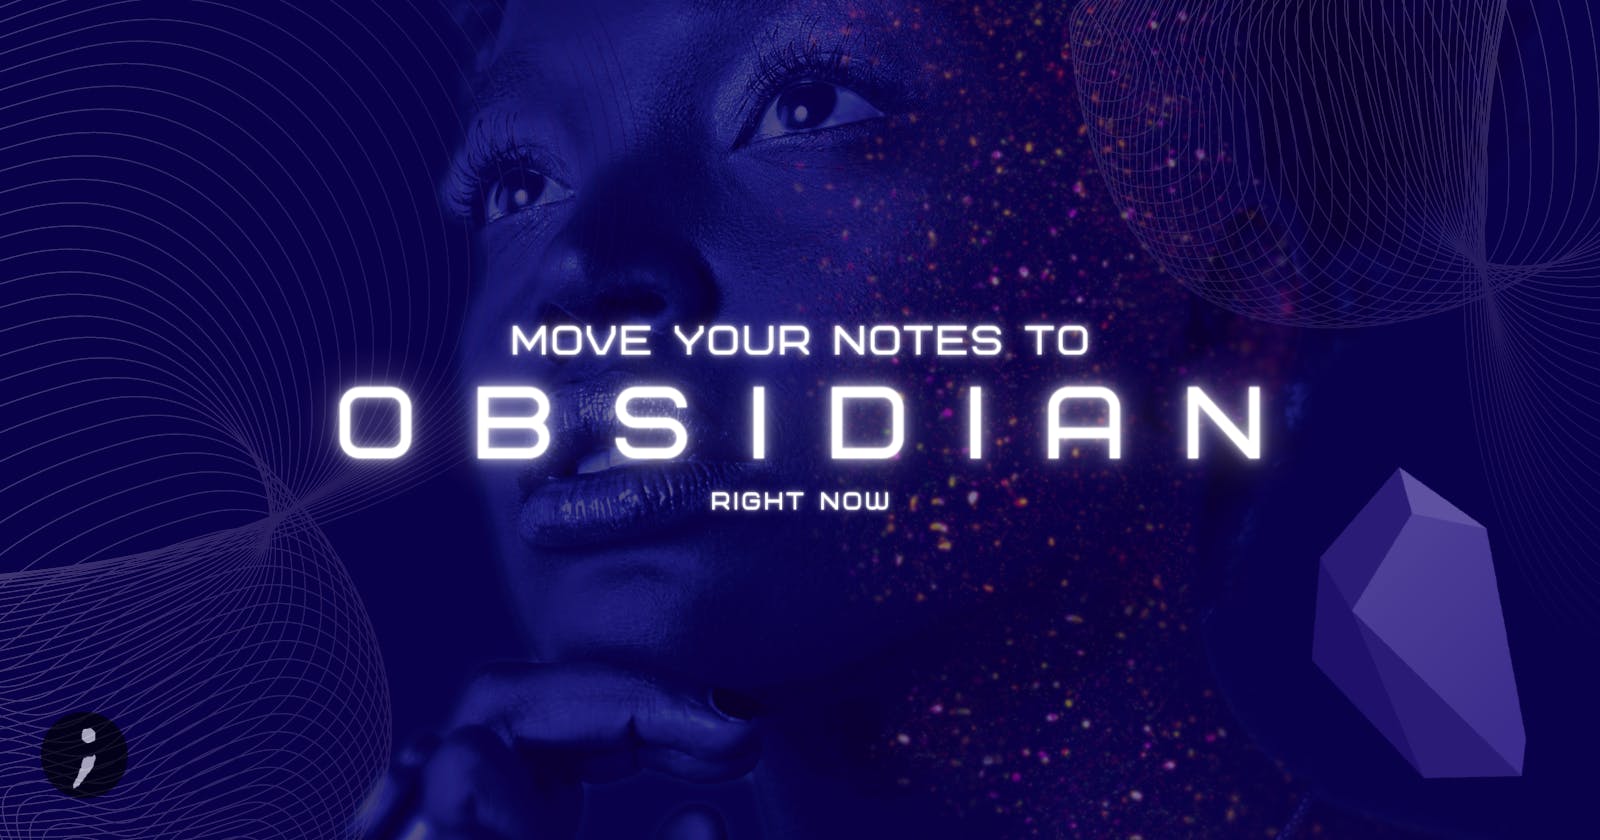 Move Your Notes to Obsidian Right Now